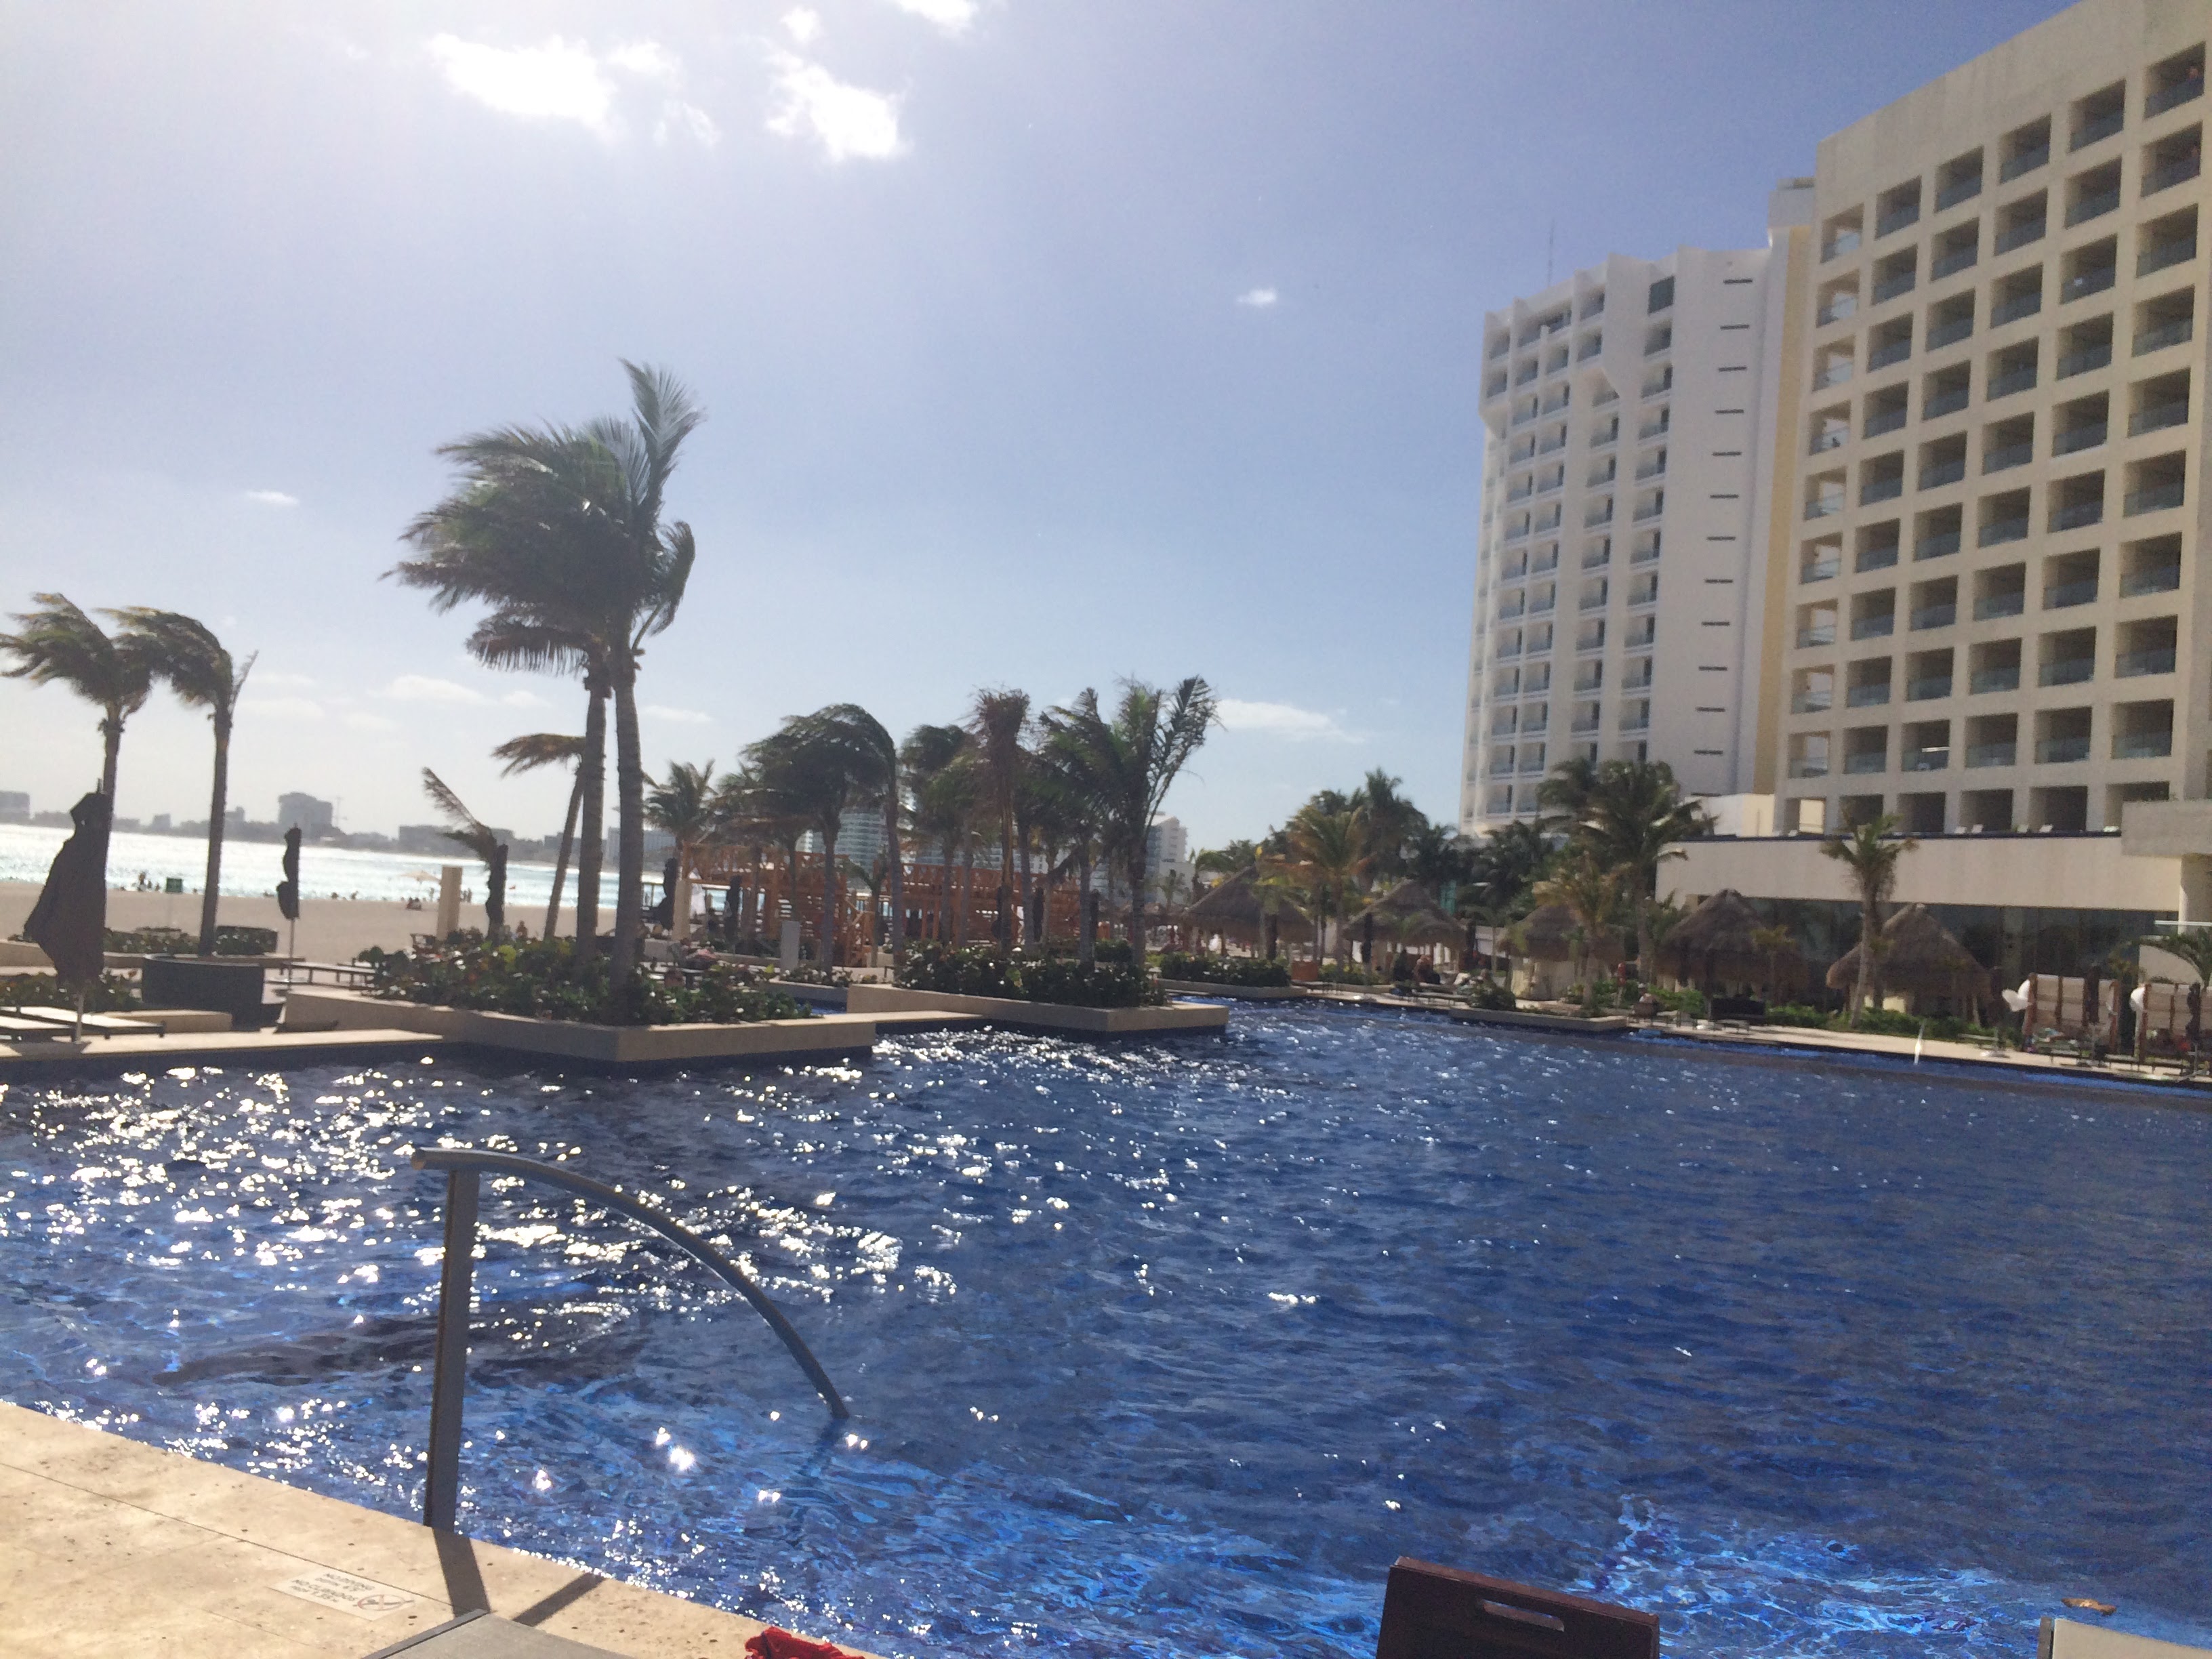 Things to do at the Hyatt Ziva Cancun include the beach and the pool